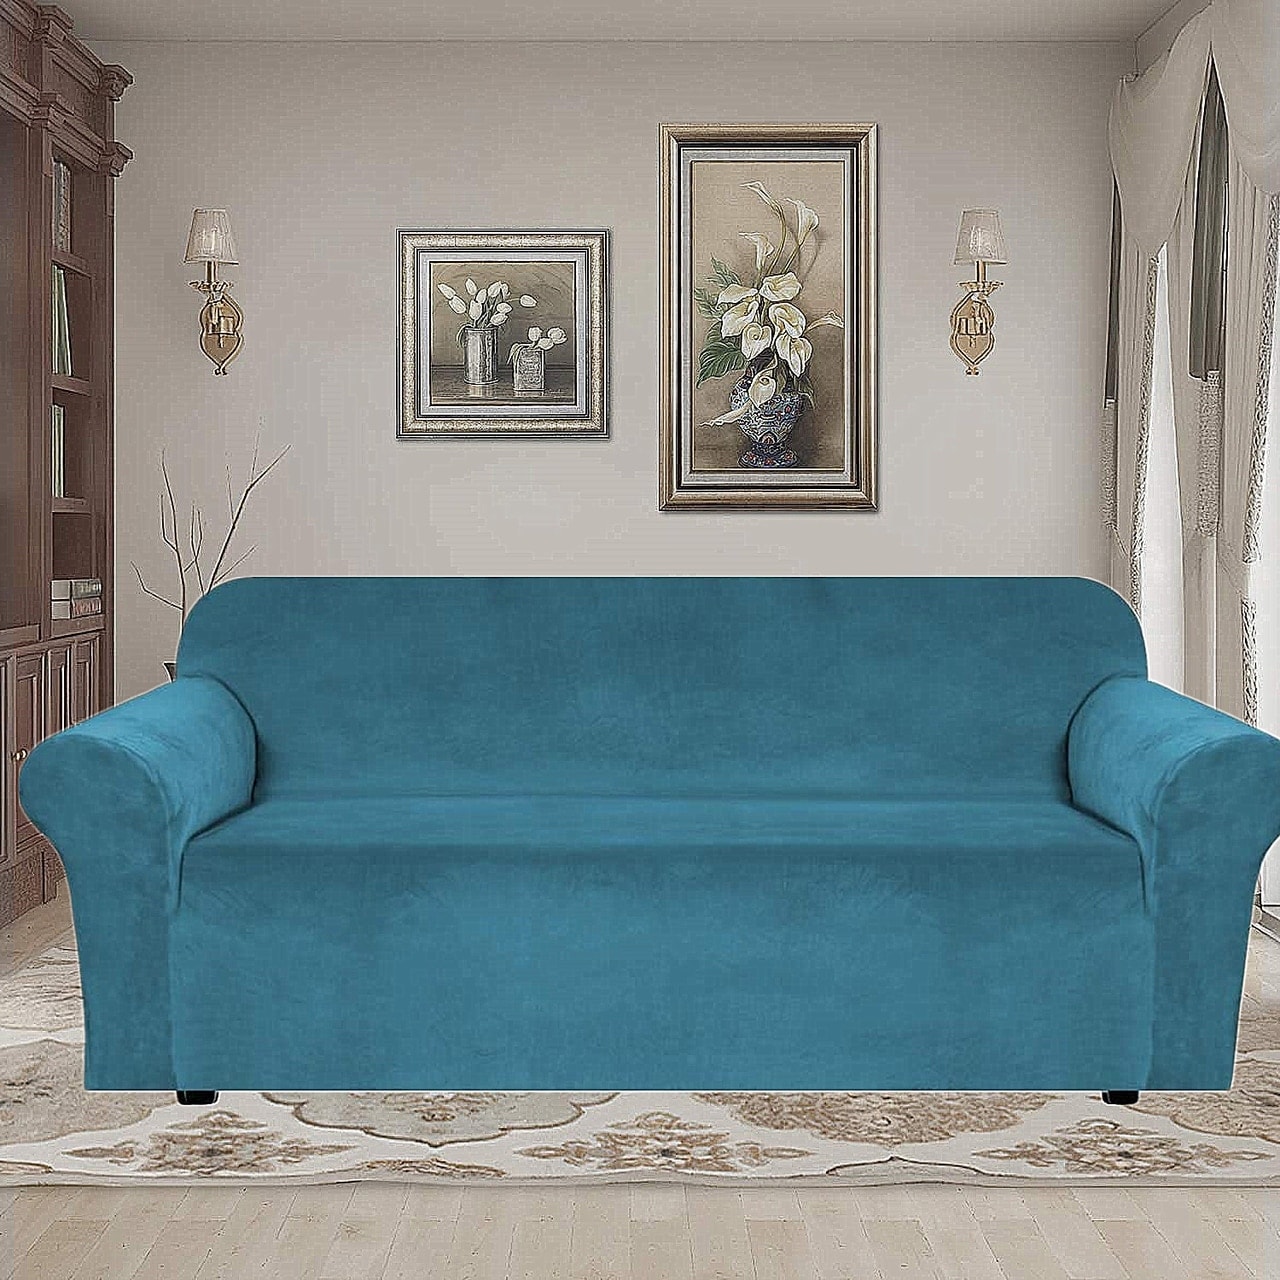 Sofa Slipcover Anti-slip Couch Cover 1/2/3/4 Seater Protector Cloth Home Decor 